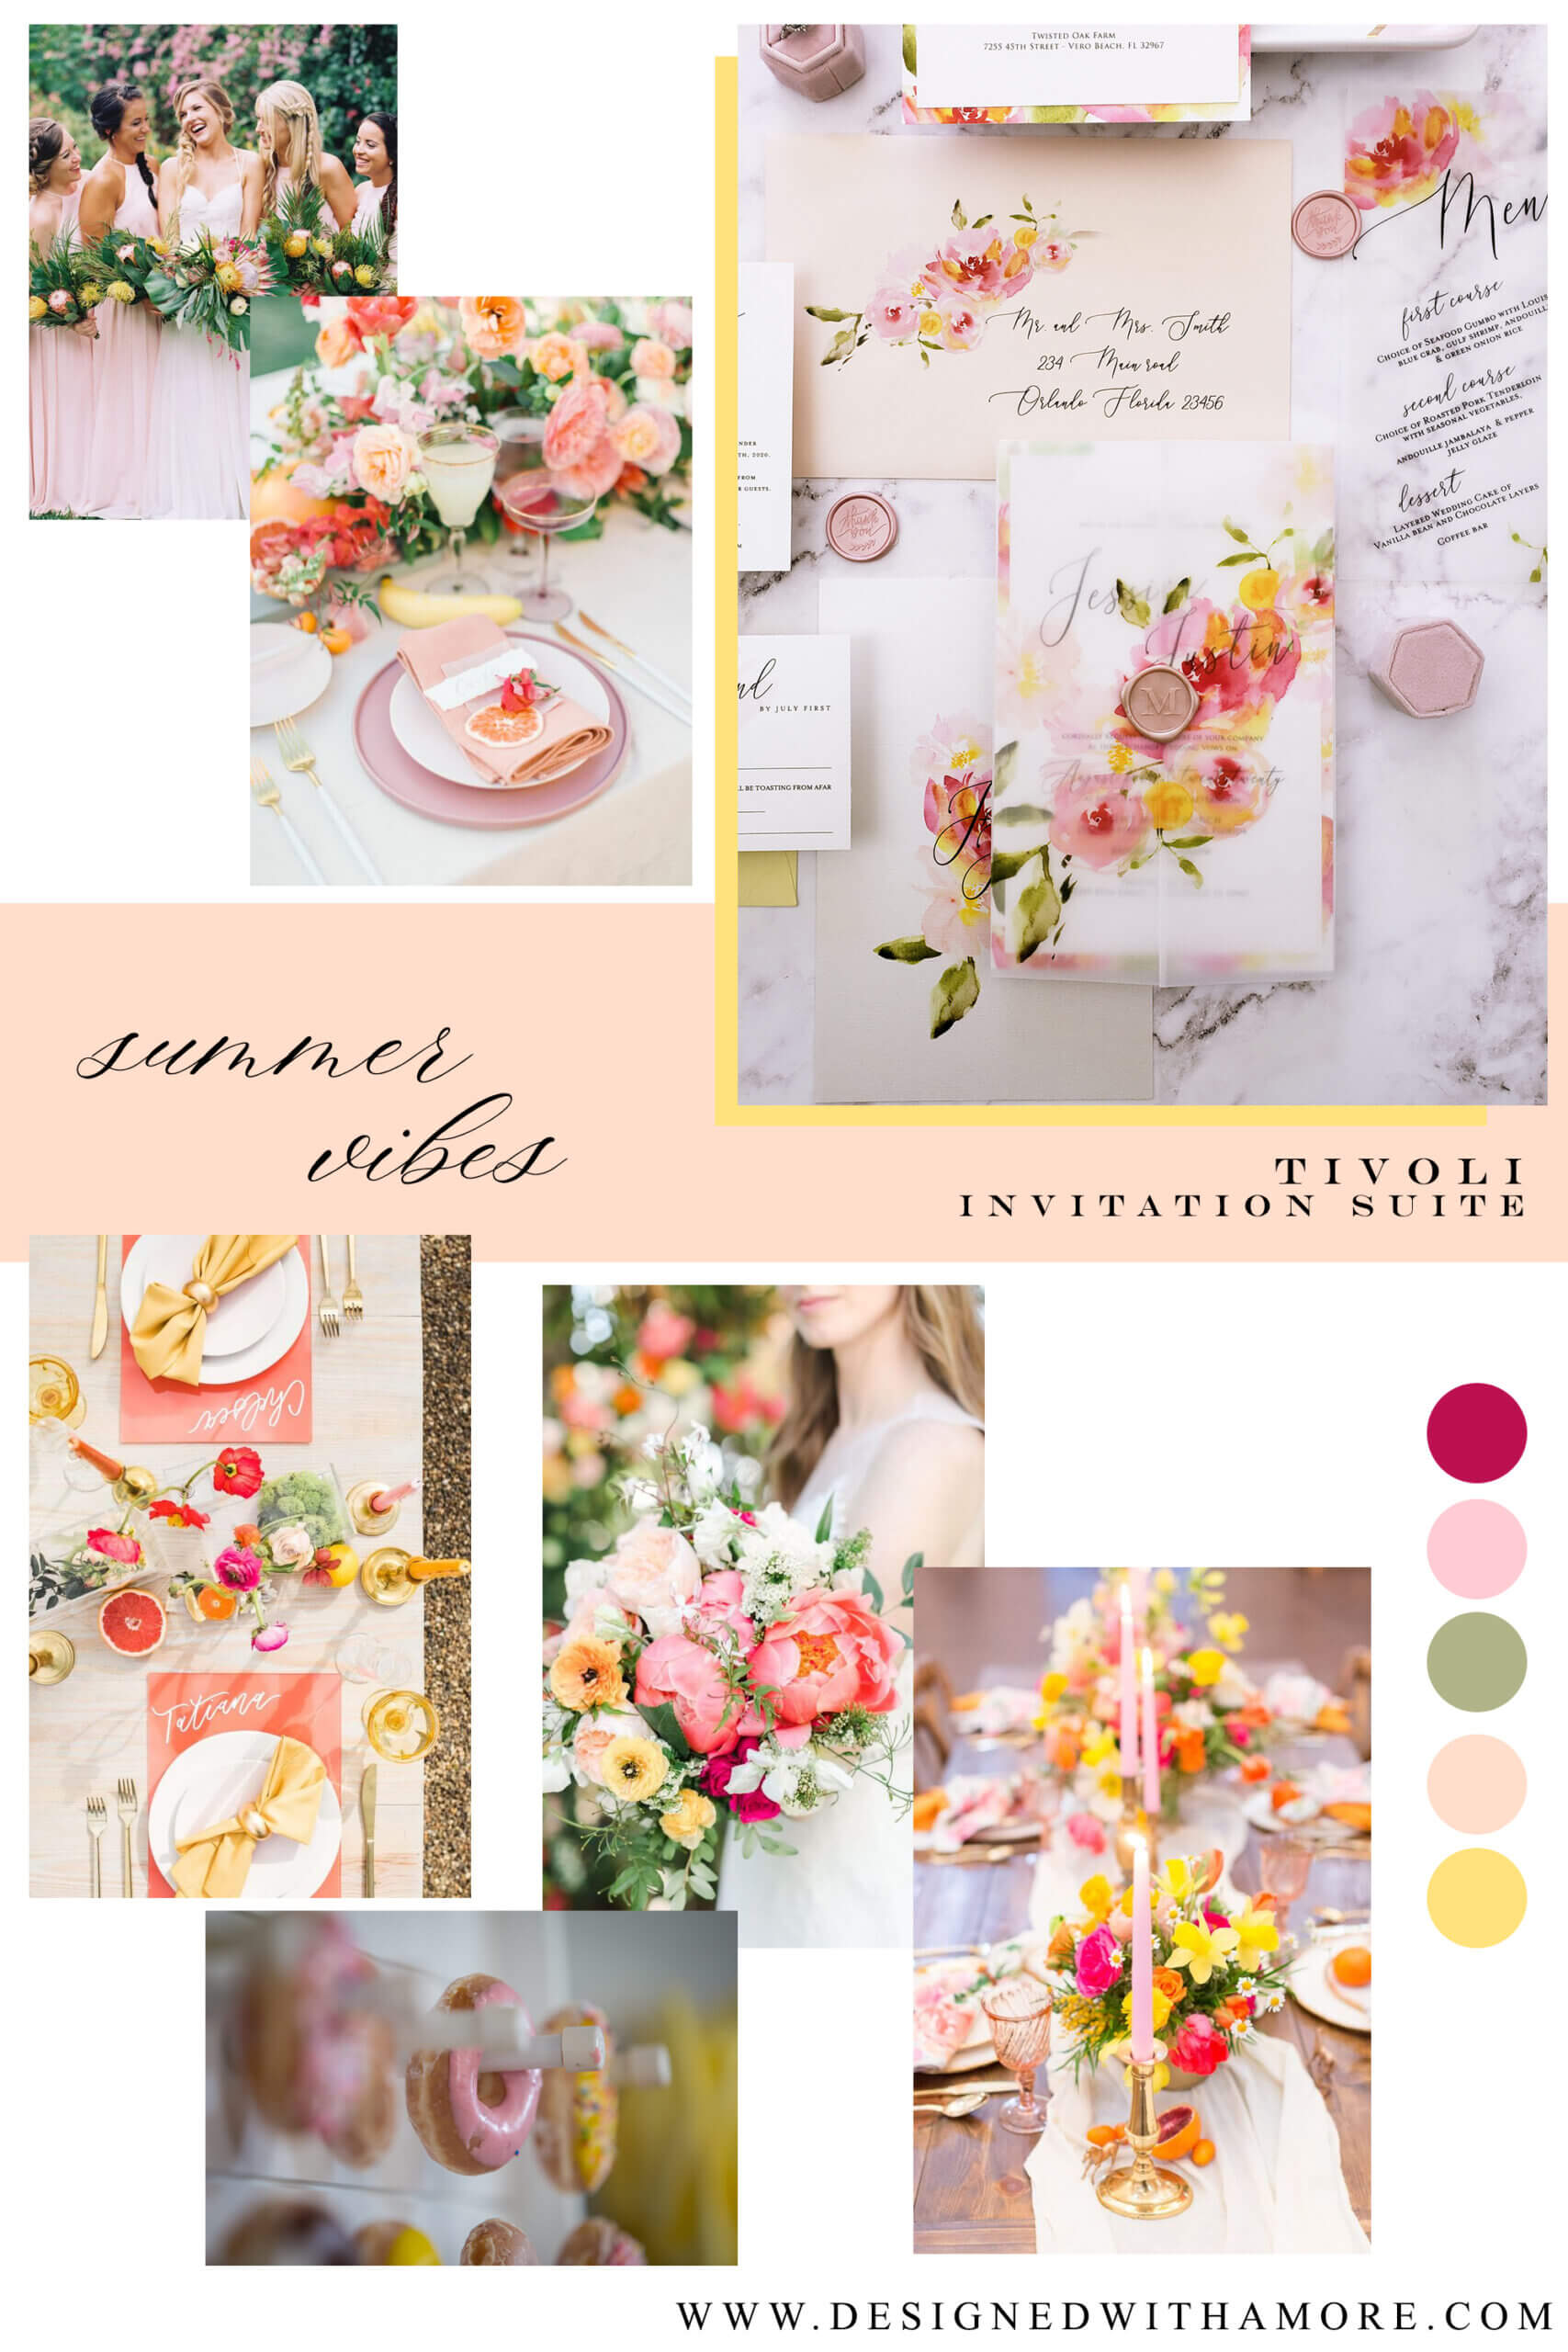 A collage of a wedding cake, tables, and gifts